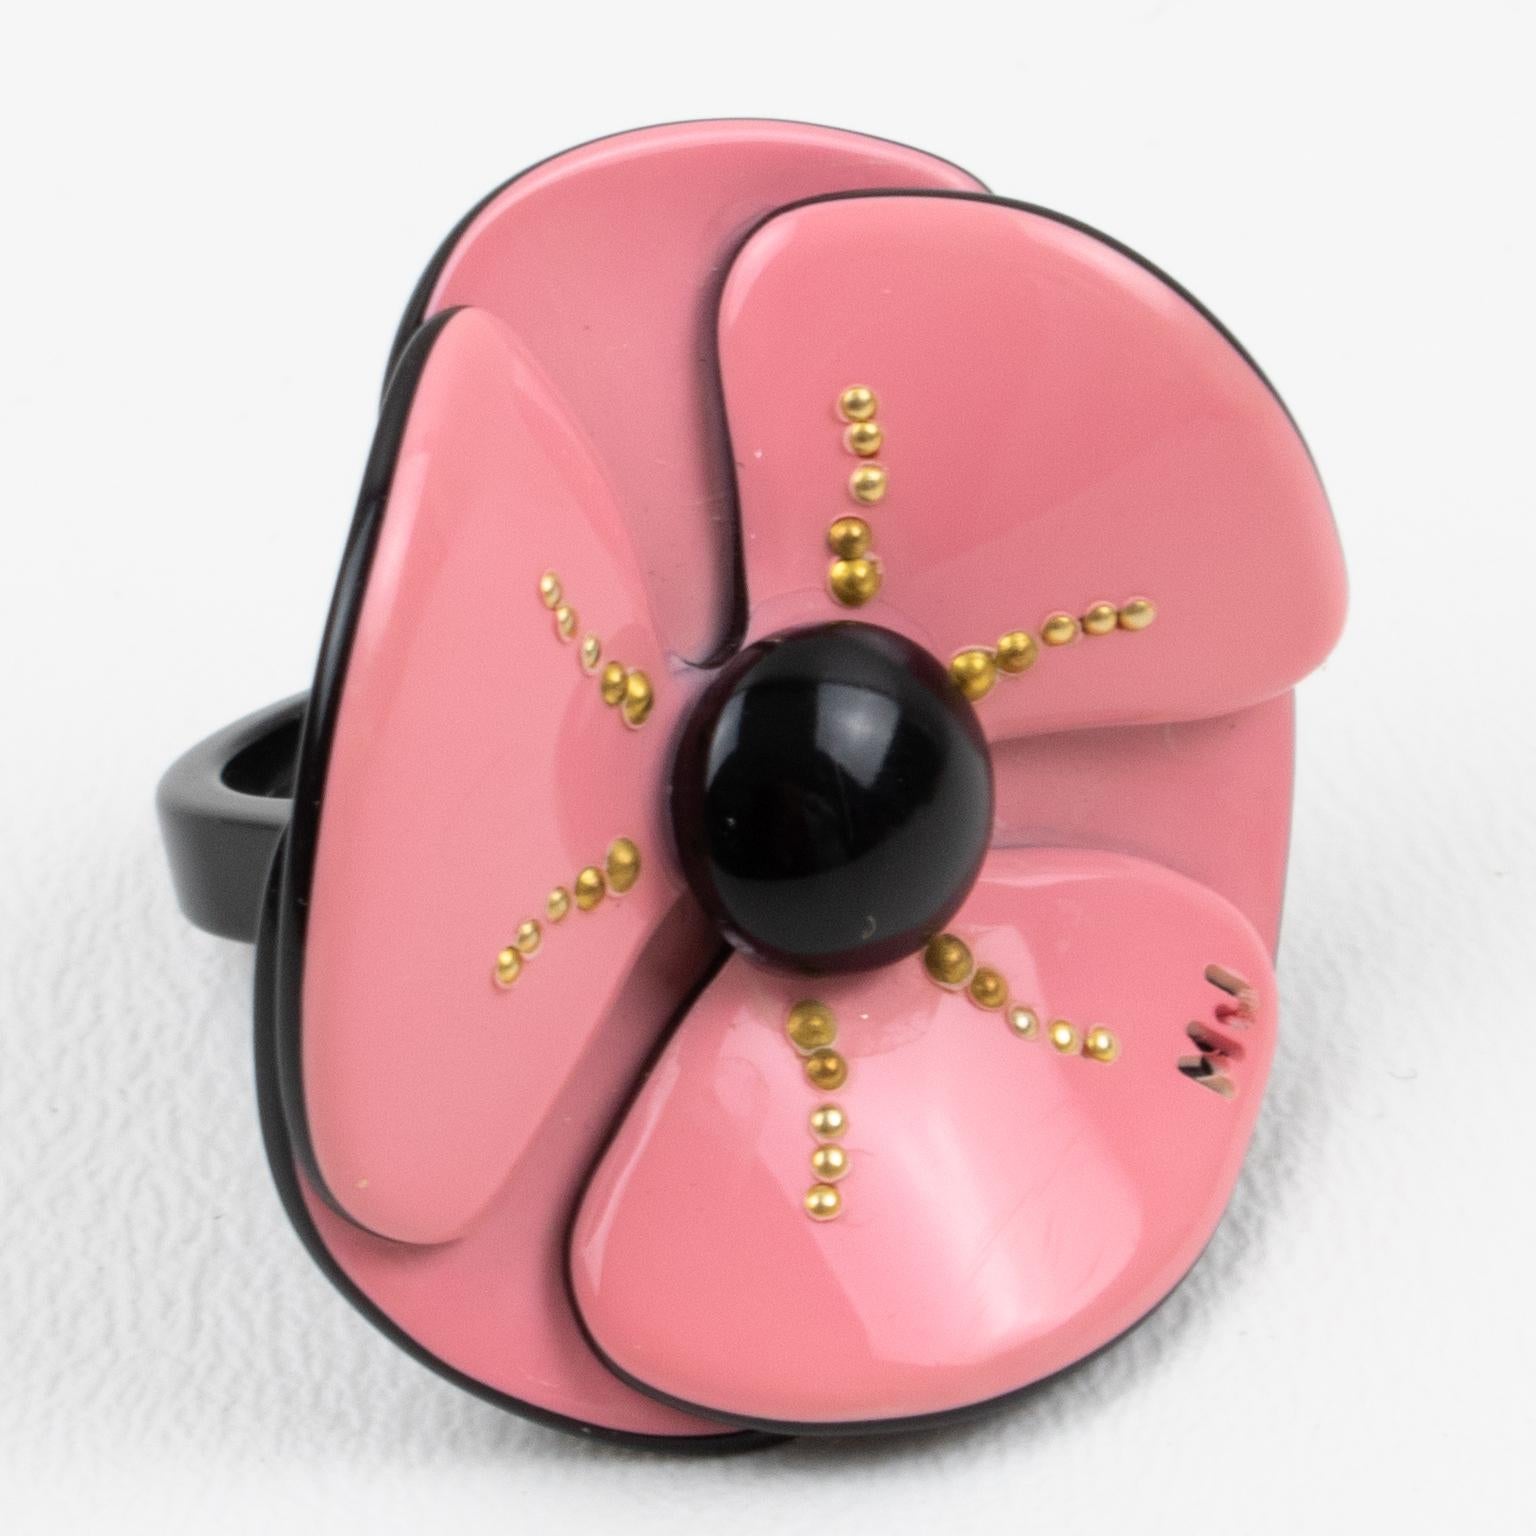 This lovely dimensional fashion ring by Marc Jacobs has a floral-inspired flair. It is made of lightweight resin featuring a wide poppy flower with a black heart and brass stud accents. The piece boasts an elegant palette of powder pink and black